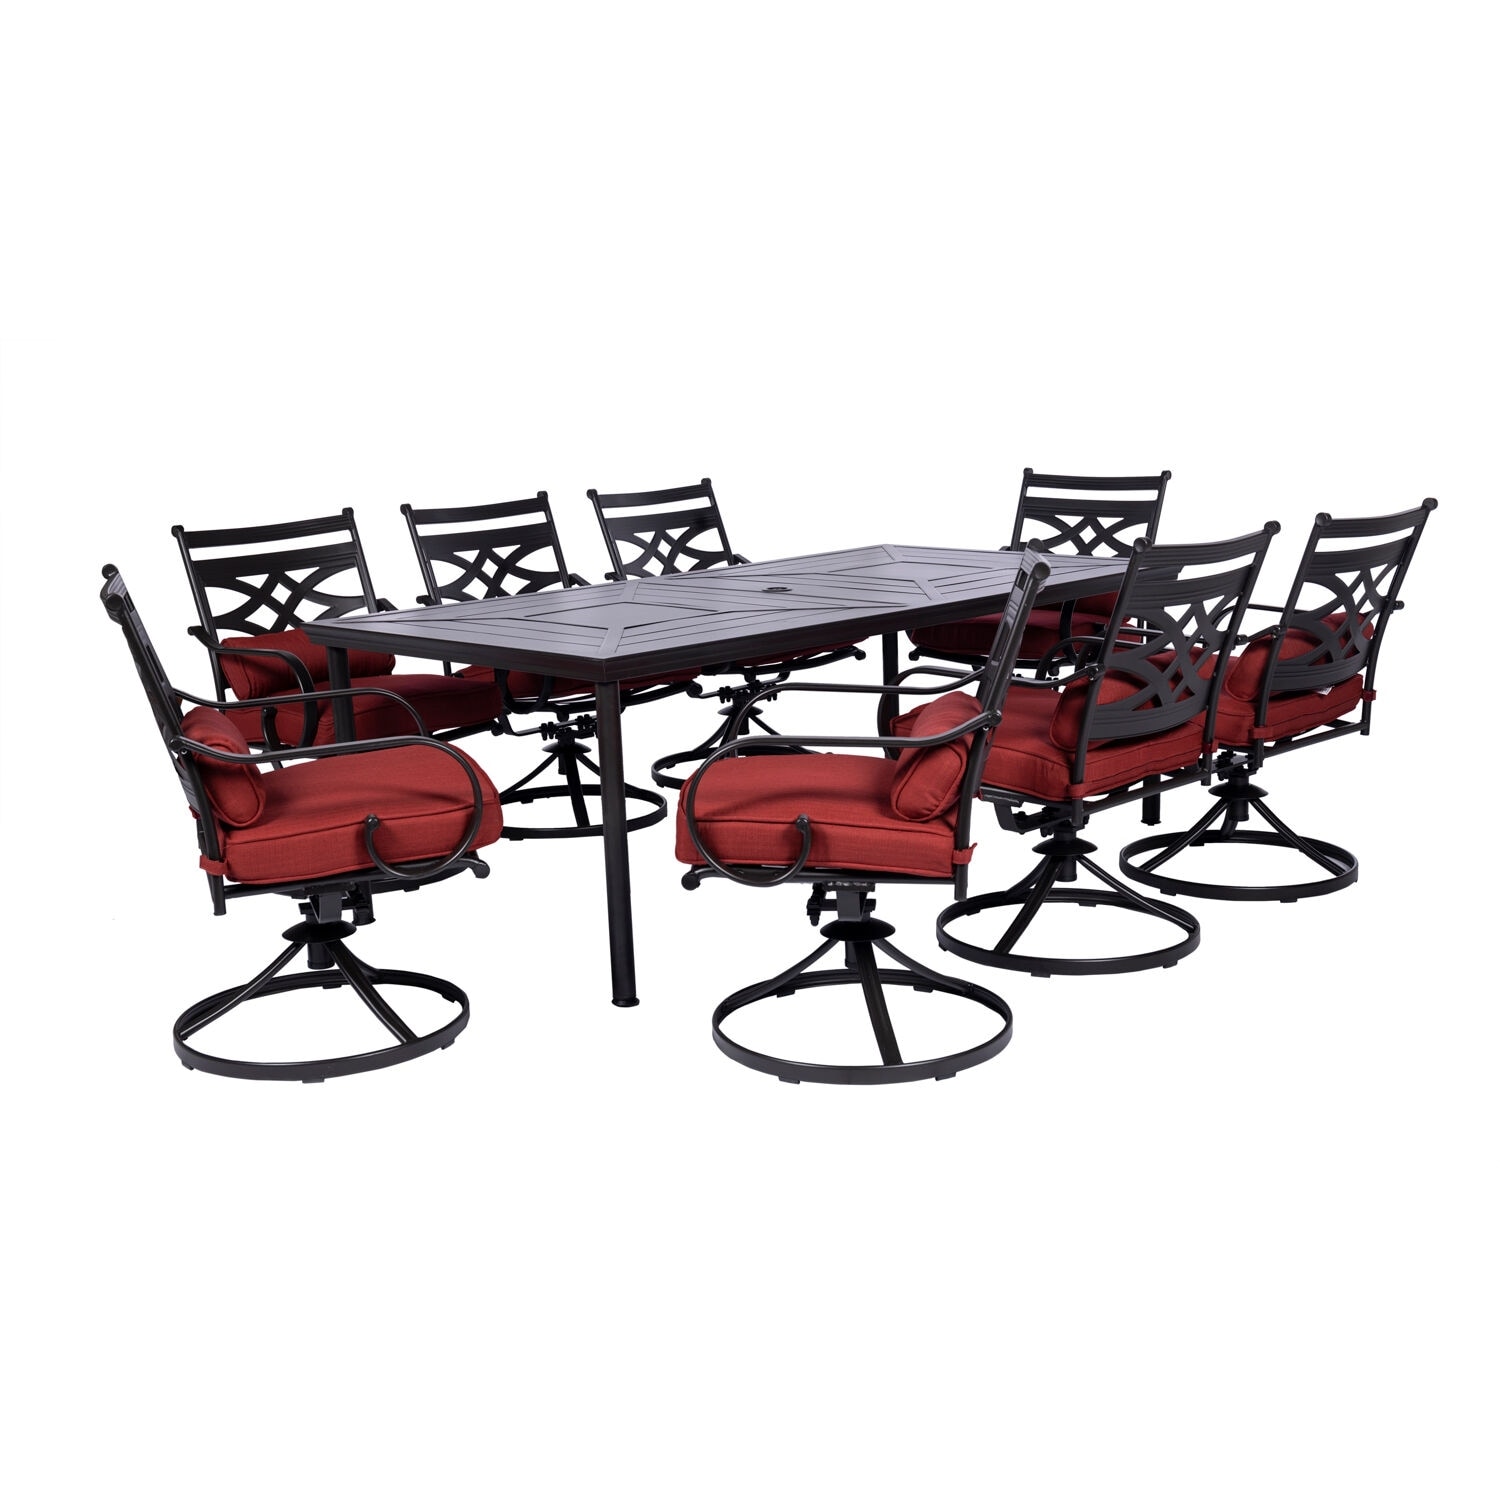 Hanover Montclair 9 Piece Dining Set In Chili Red With 8 Swivel Rockers And A 42 In. X 84 In. Table